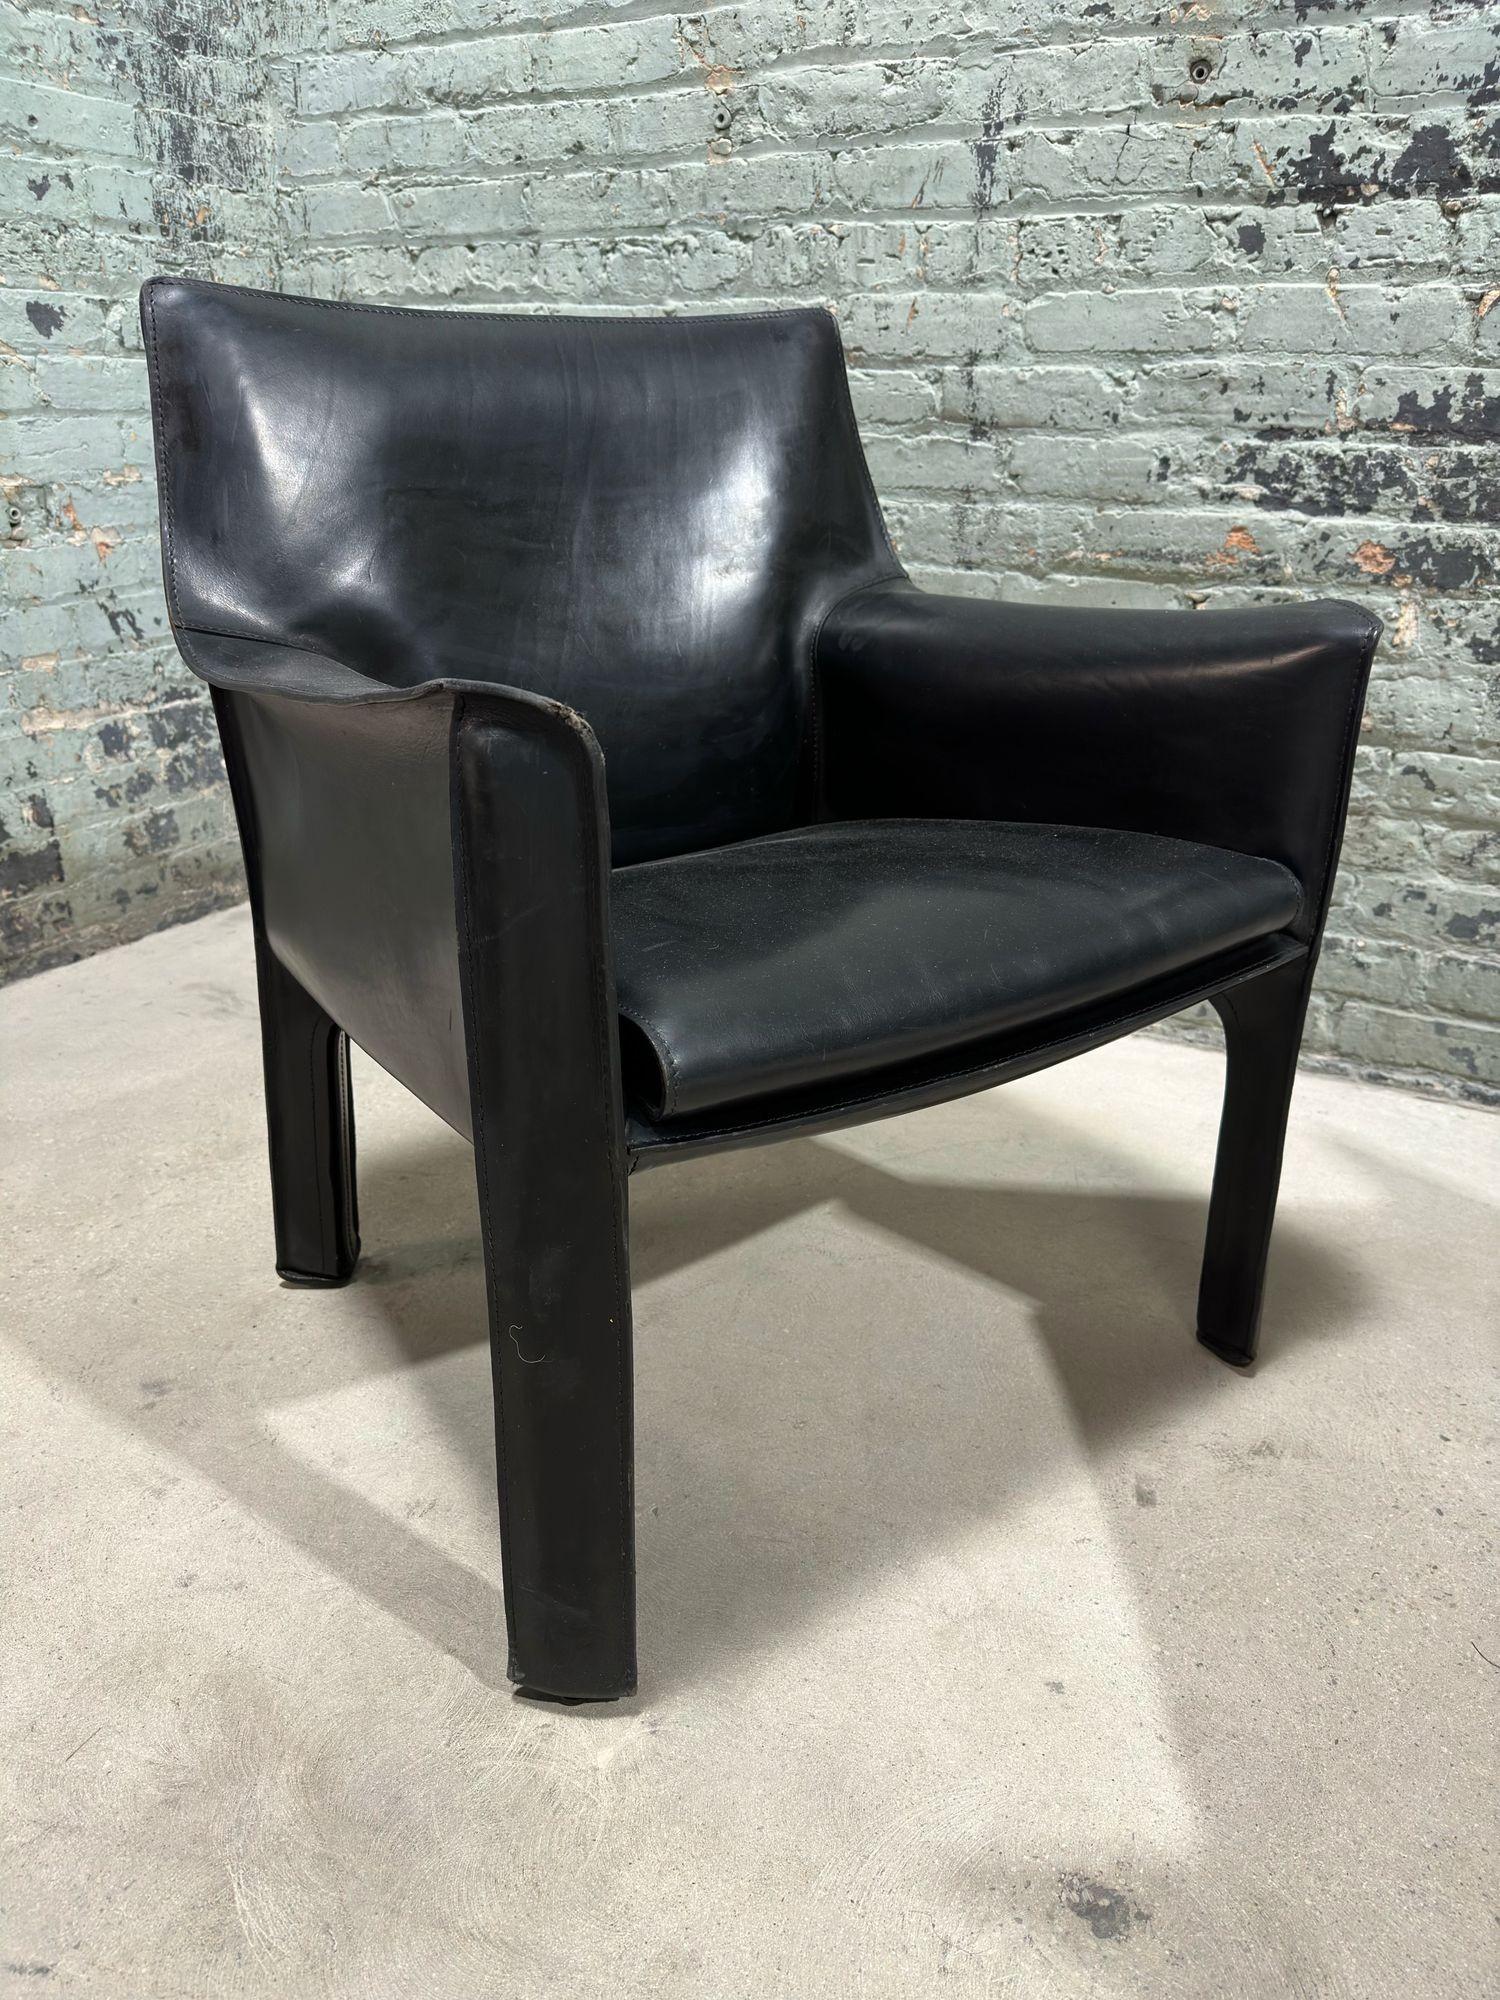 Pair Mario Bellini Black Leather Cab Chairs, Model 414 for Cassina Italy, 1980 For Sale 1